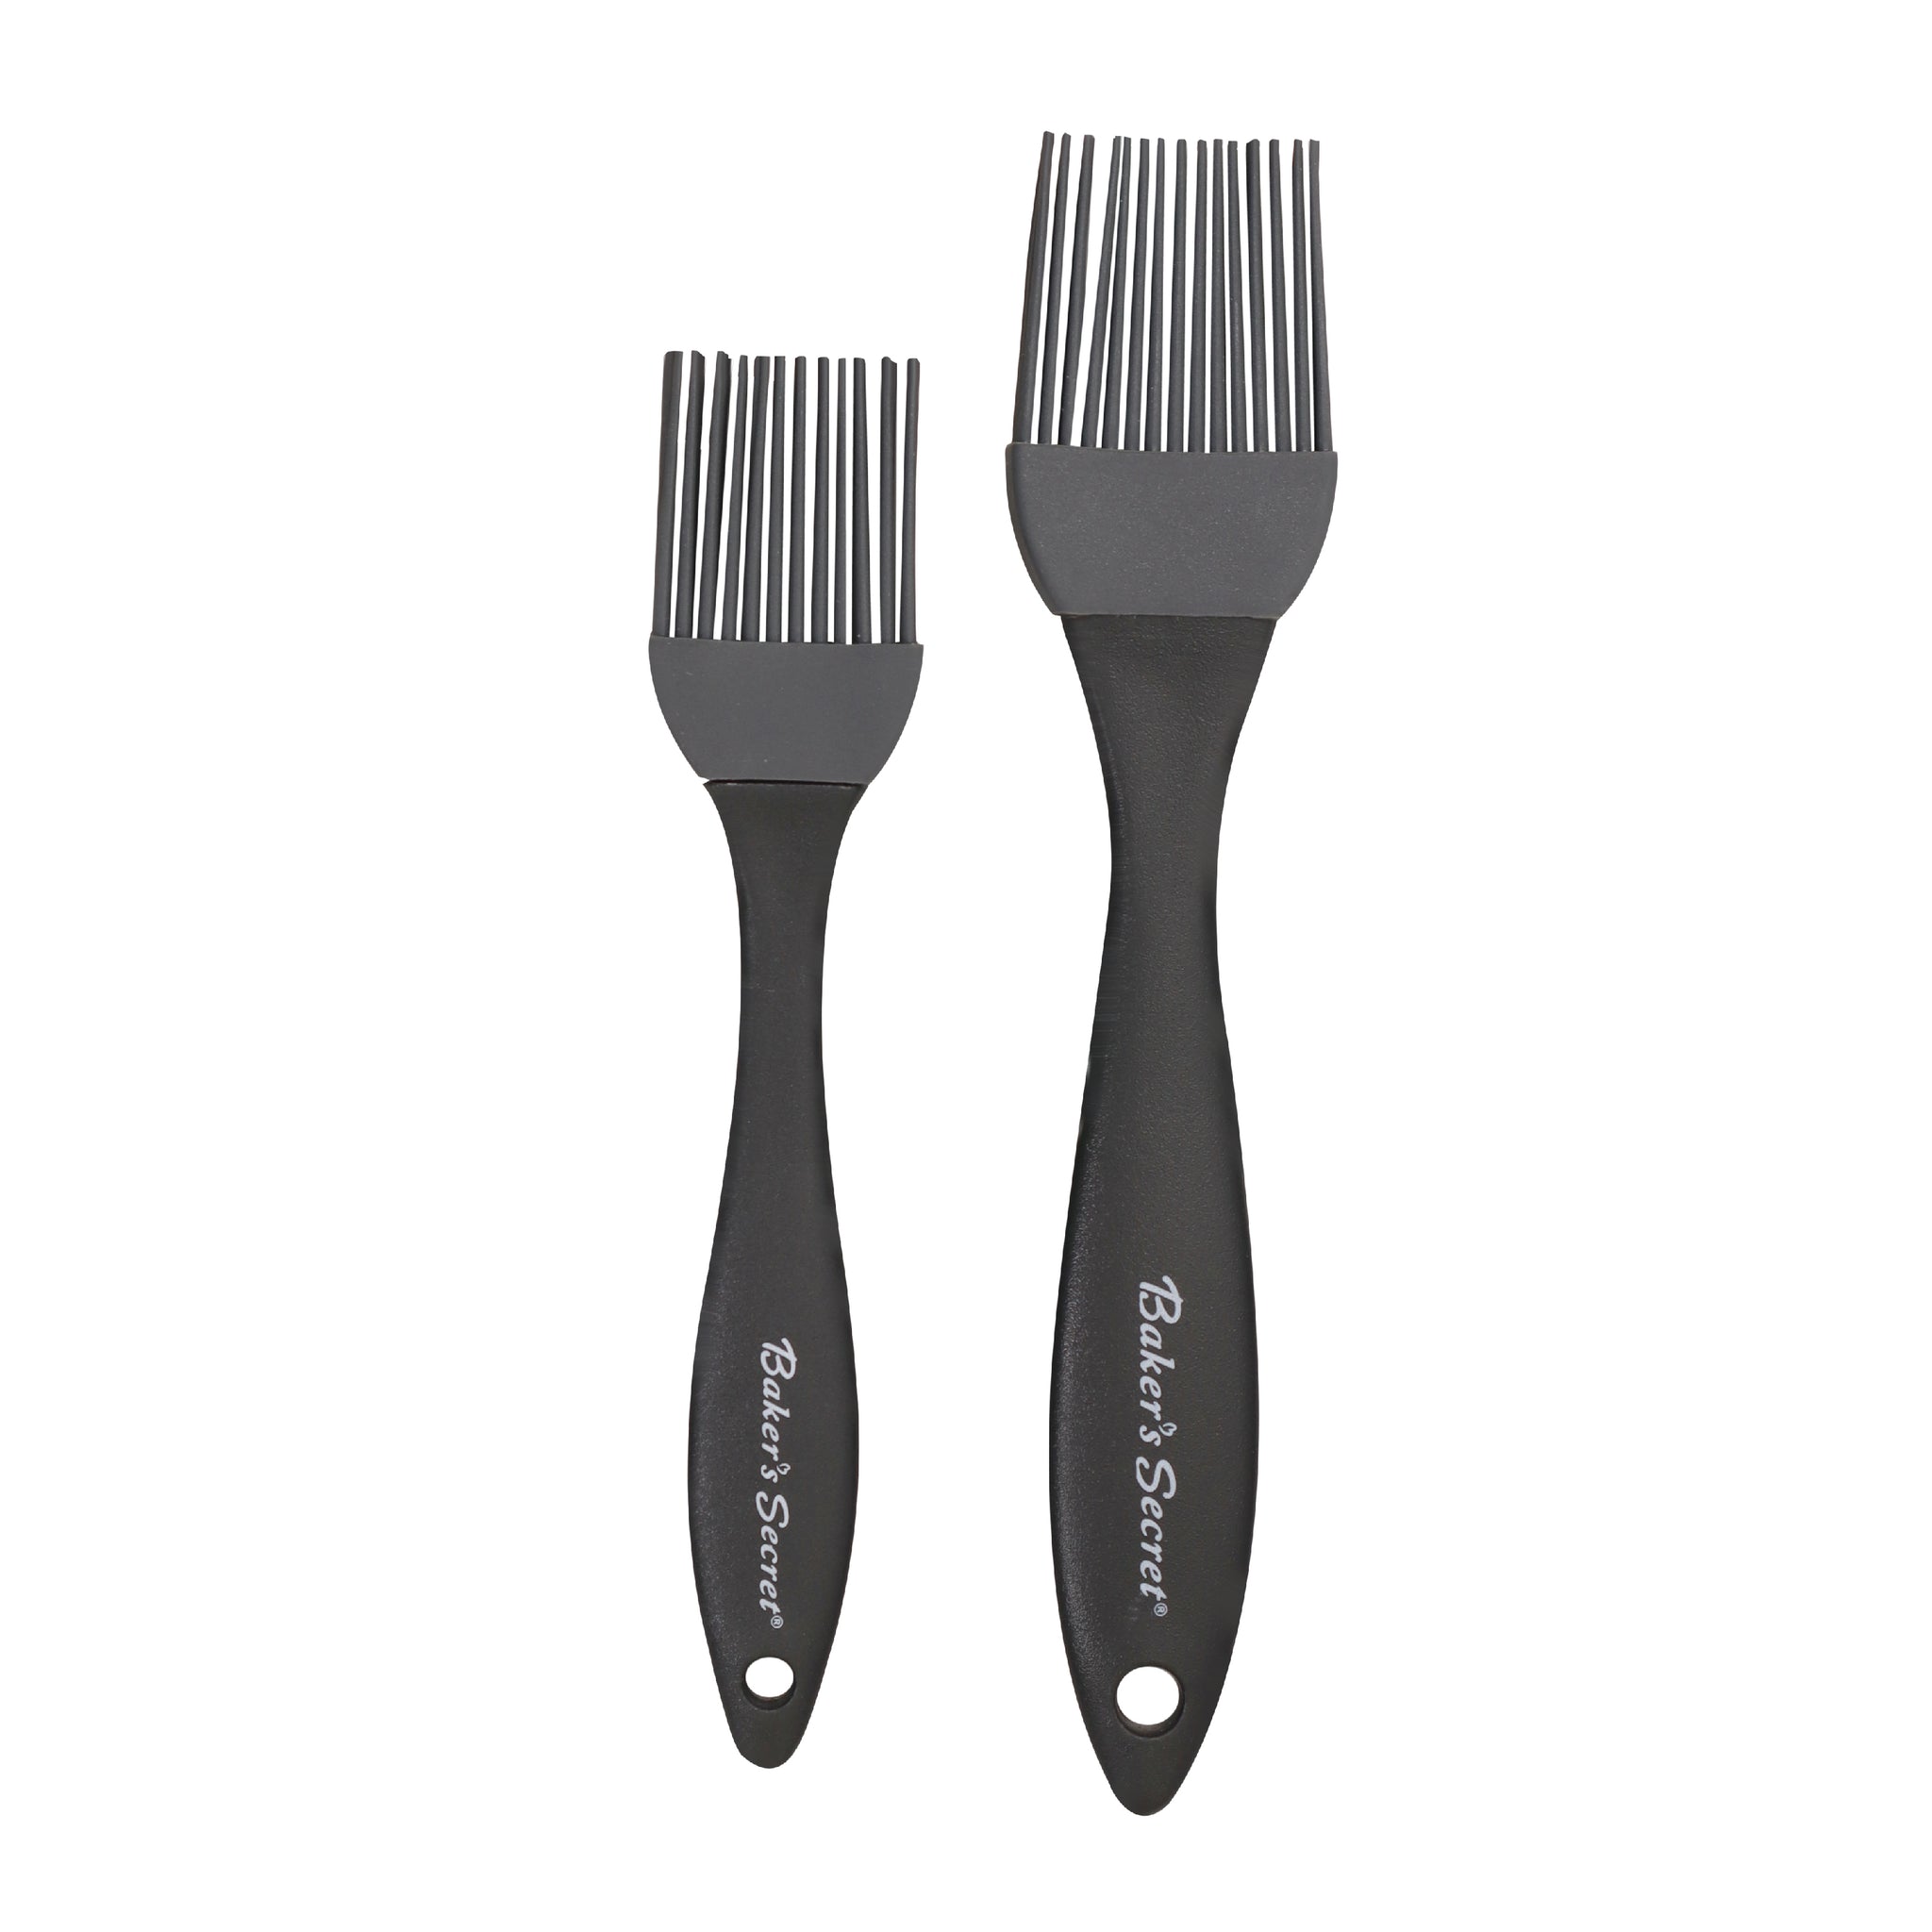 Silicone Brushes Set of 2 Black Cookware Accessories - Baker's Secret